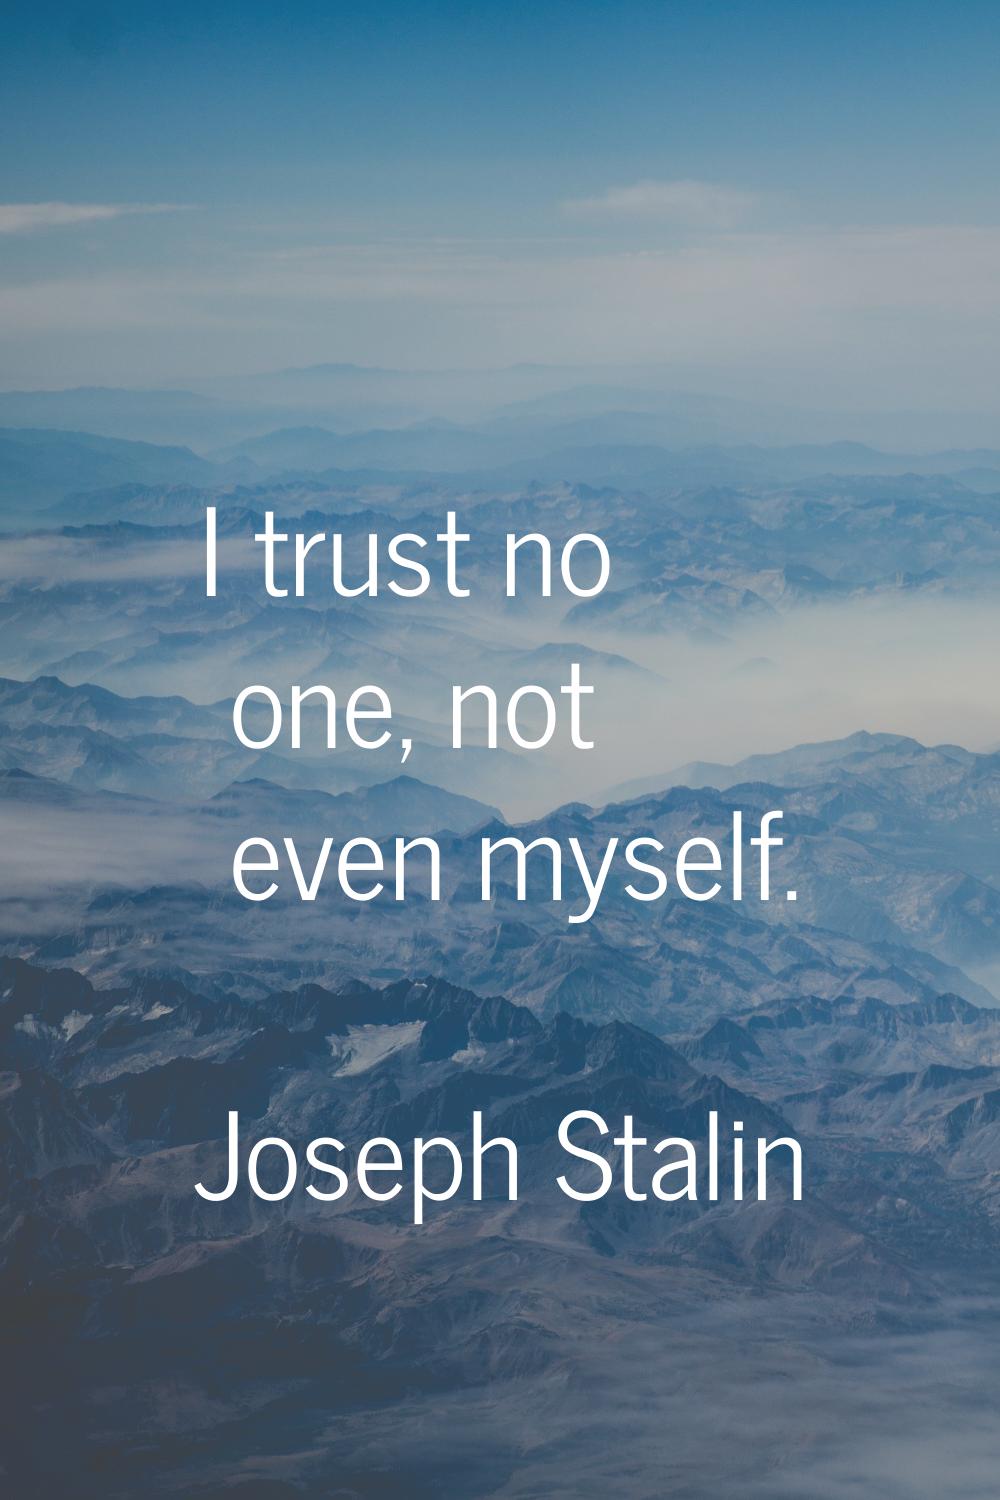 I trust no one, not even myself.